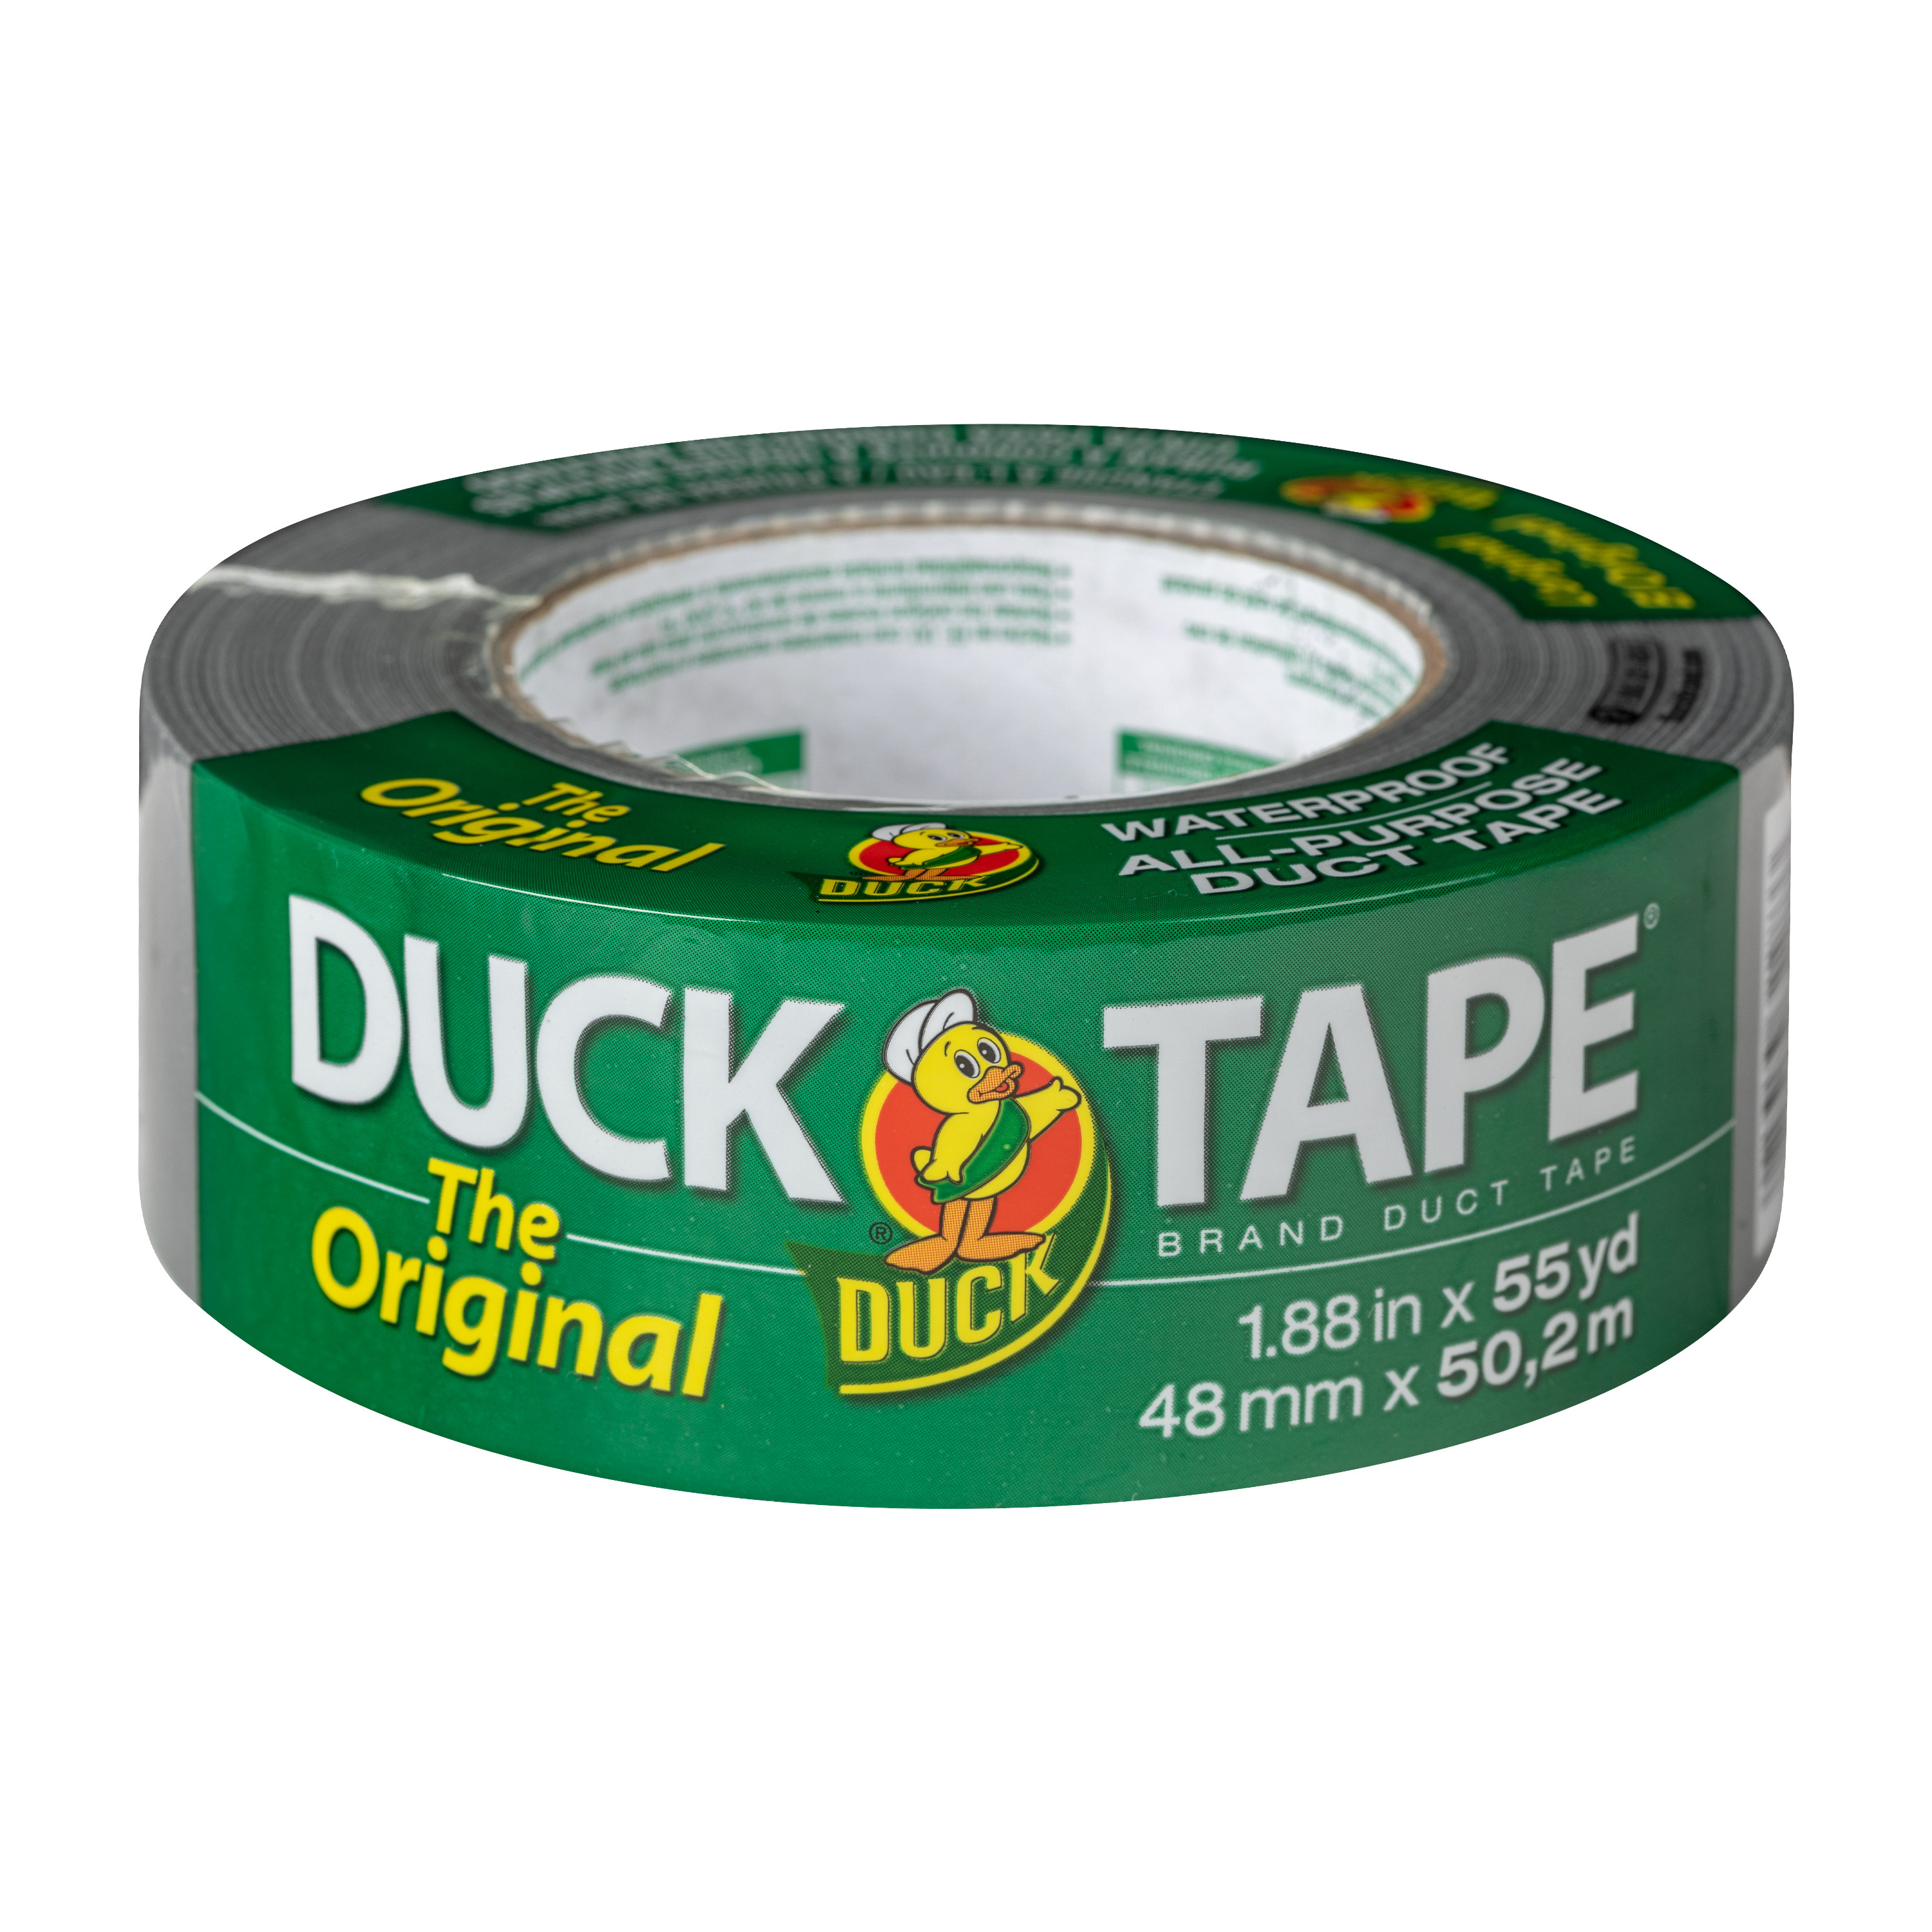 Duck Brand 1.88 in. x 55 yd. Silver Original Duct Tape - image 1 of 11